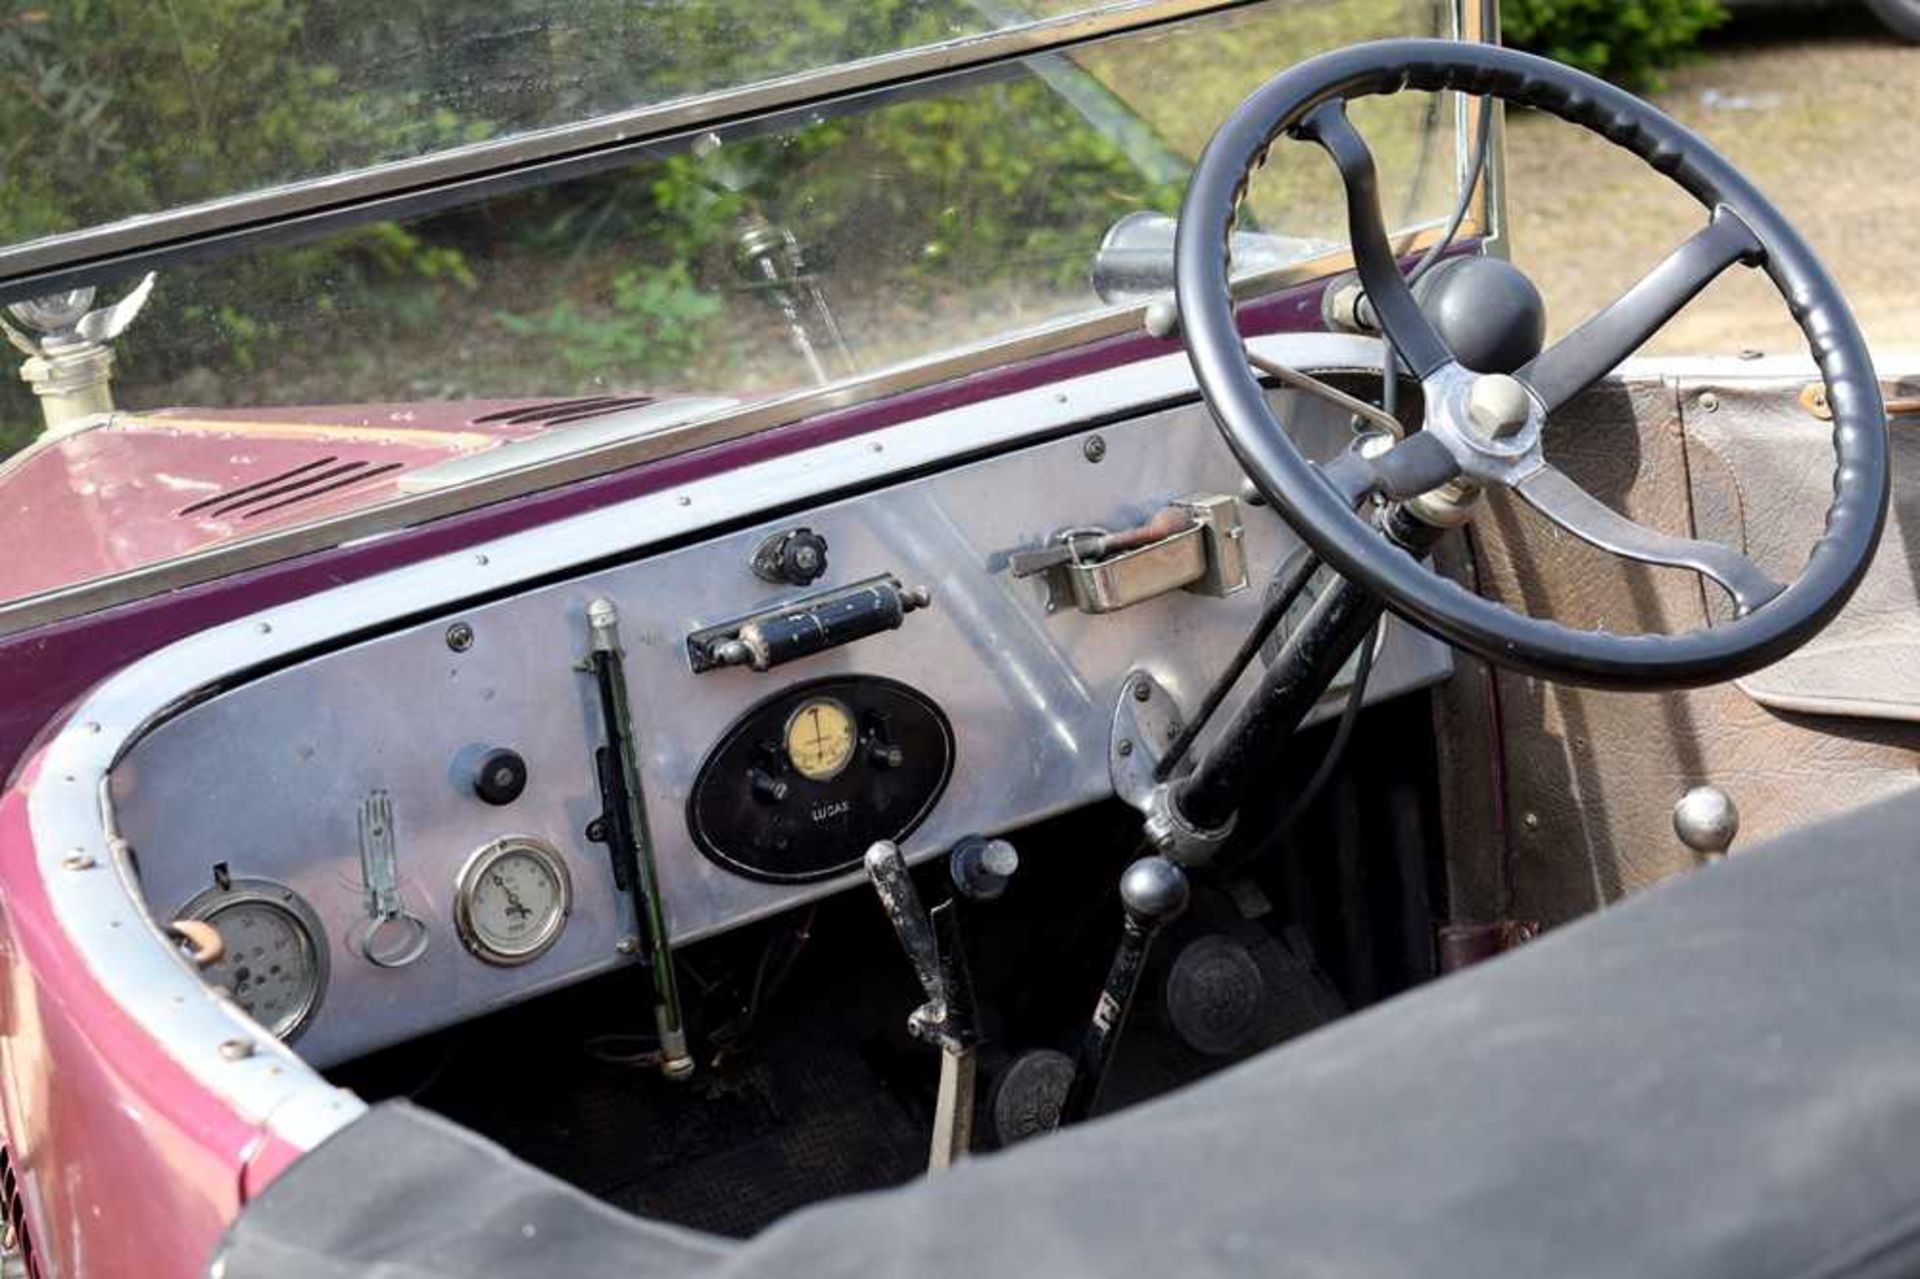 1926 Morris Oxford 'Bullnose' 2-Seat Tourer with Dickey - Image 66 of 99